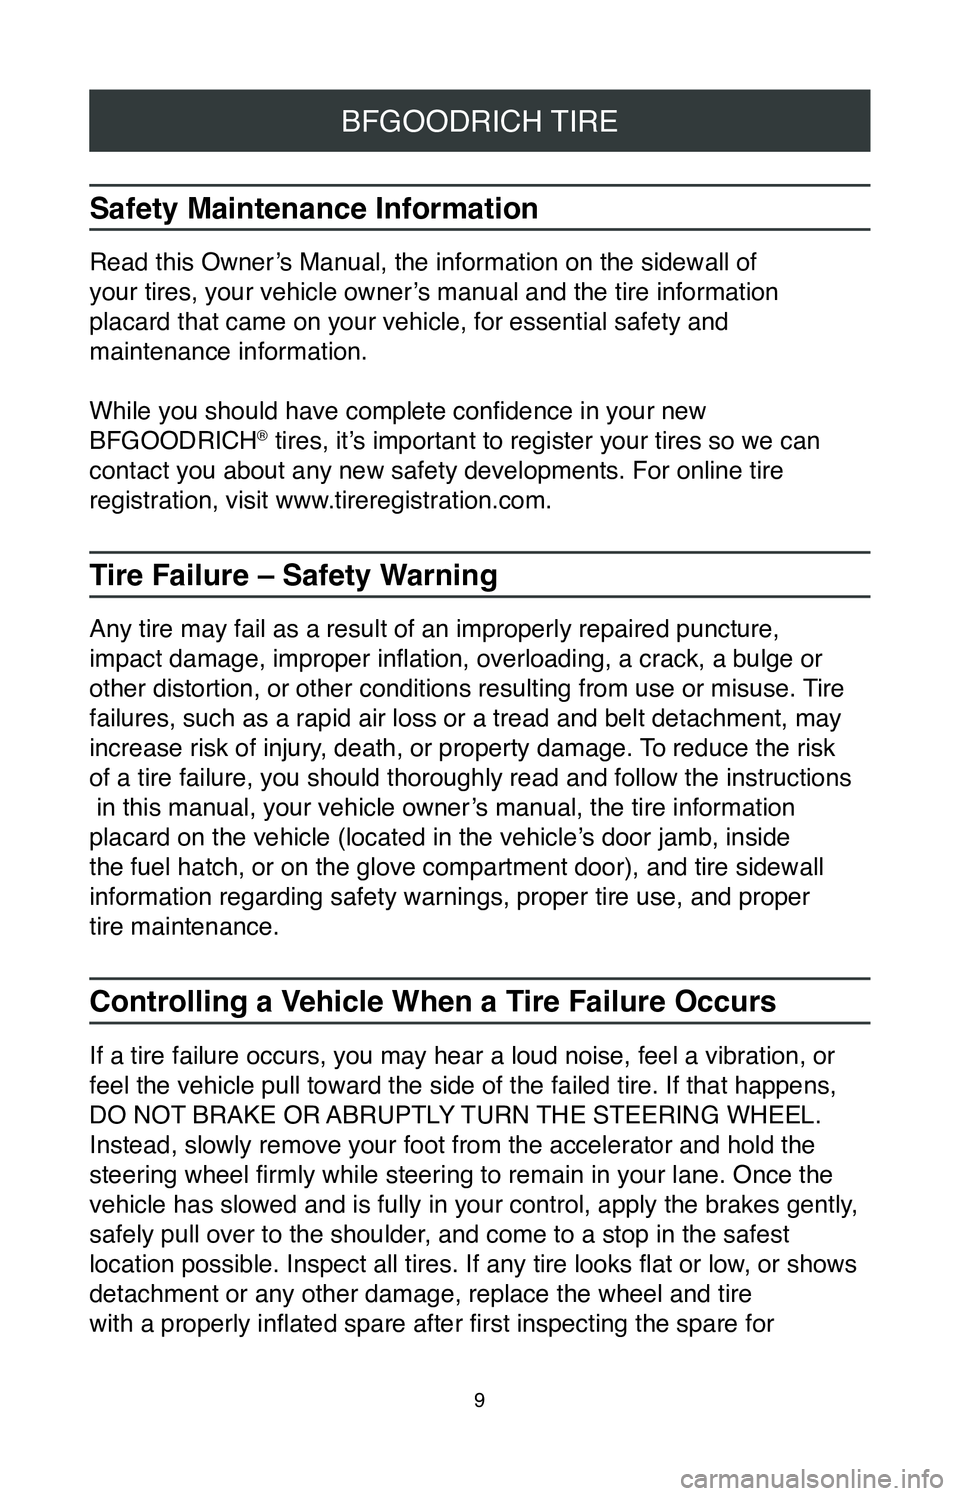 TOYOTA CAMRY HYBRID 2020  Warranties & Maintenance Guides (in English) 9
BFGOODRICH TIRE
Safety Maintenance Information
Read this Owner’s Manual, the information on the sidewall of  
your tires, your vehicle owner’s manual and the tire information   
placard that cam